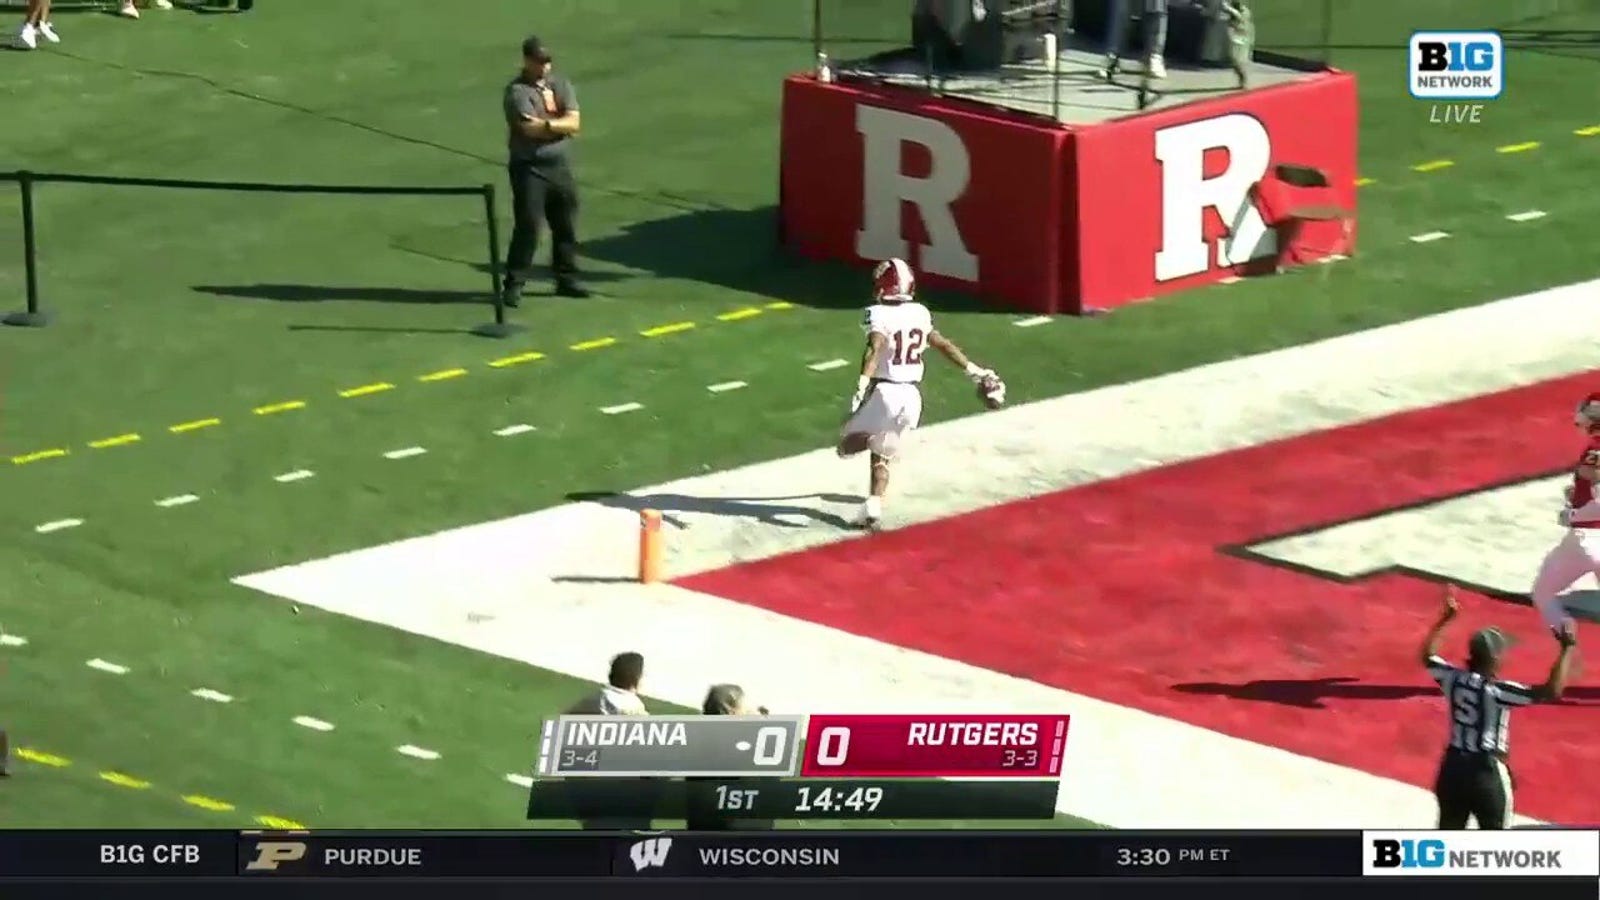 Indiana opens the game with a massive 93-yard kick return TD by Jaylin Lucas